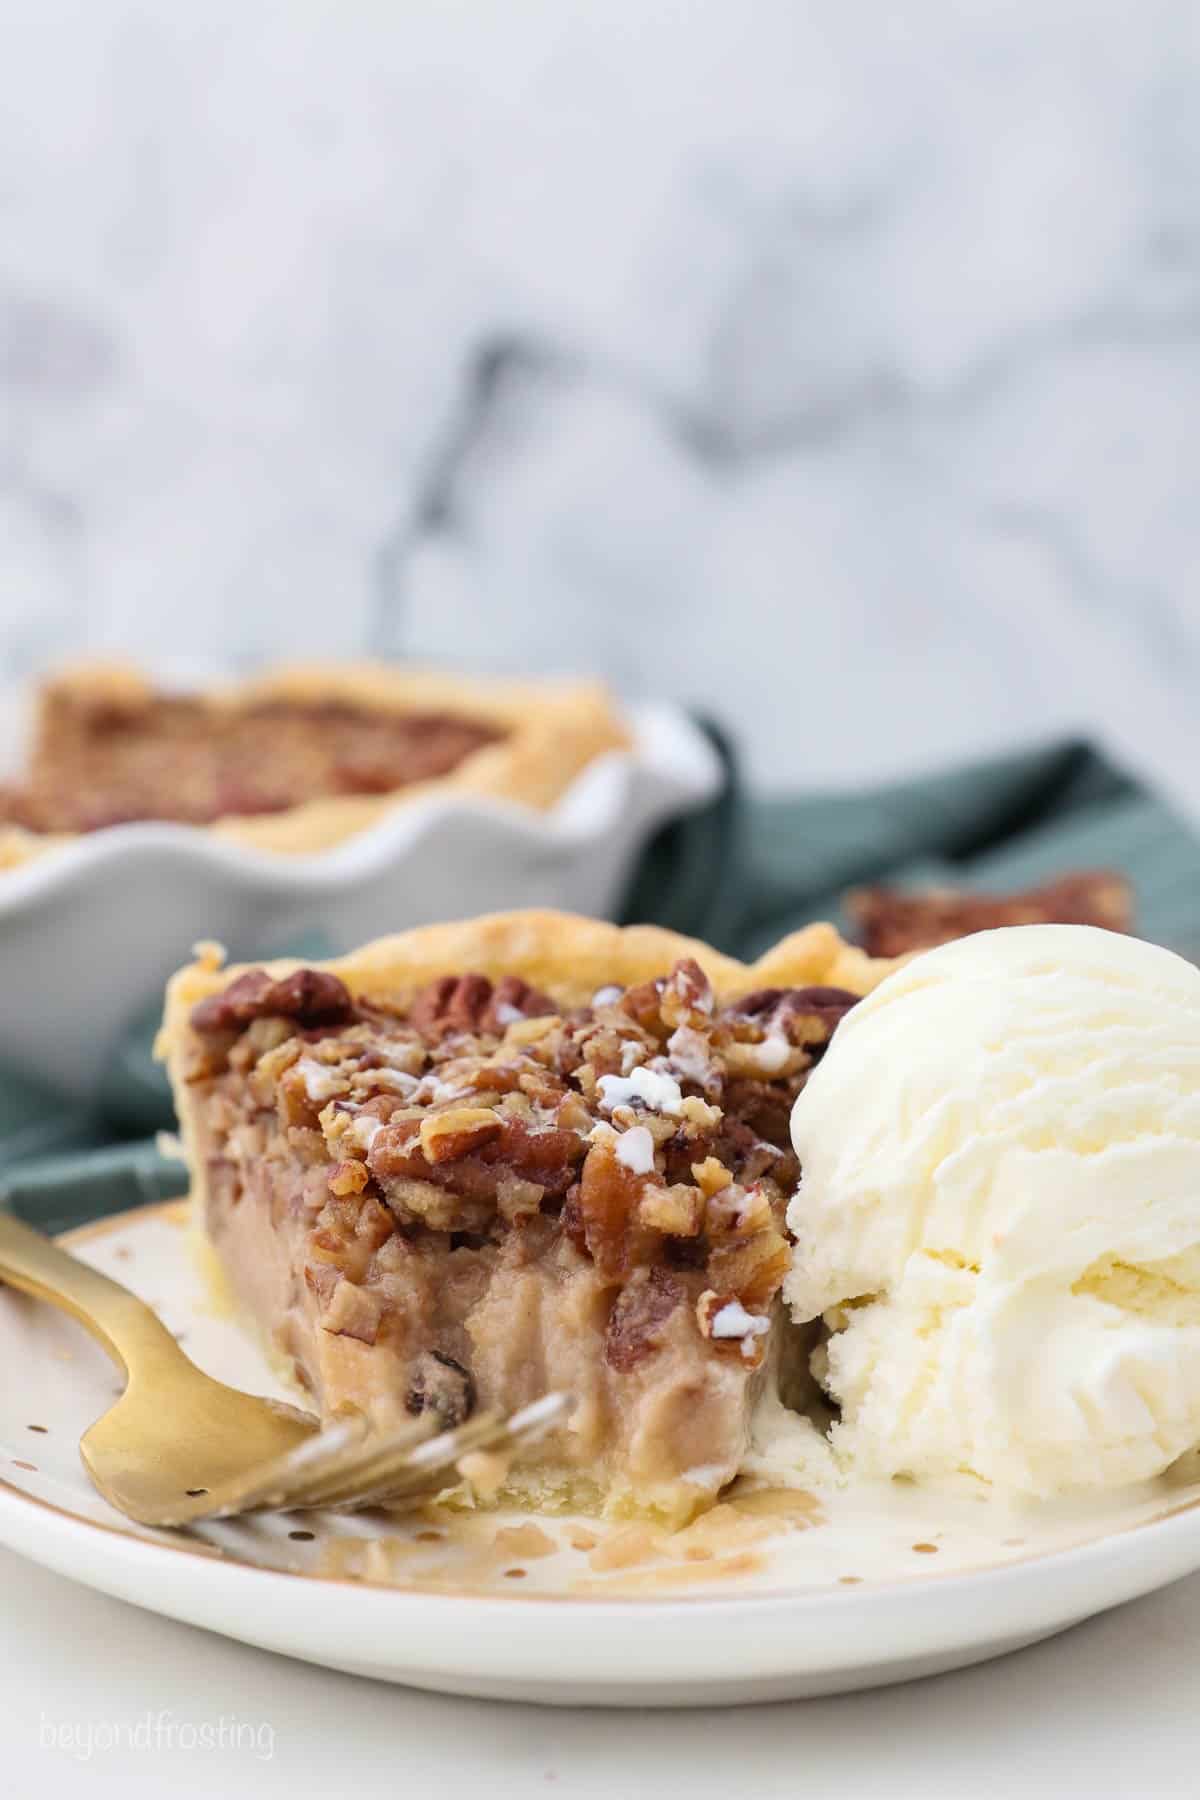 A piece of pecan pie on a white plate next to a fork and a scoop of vanilla ice cream